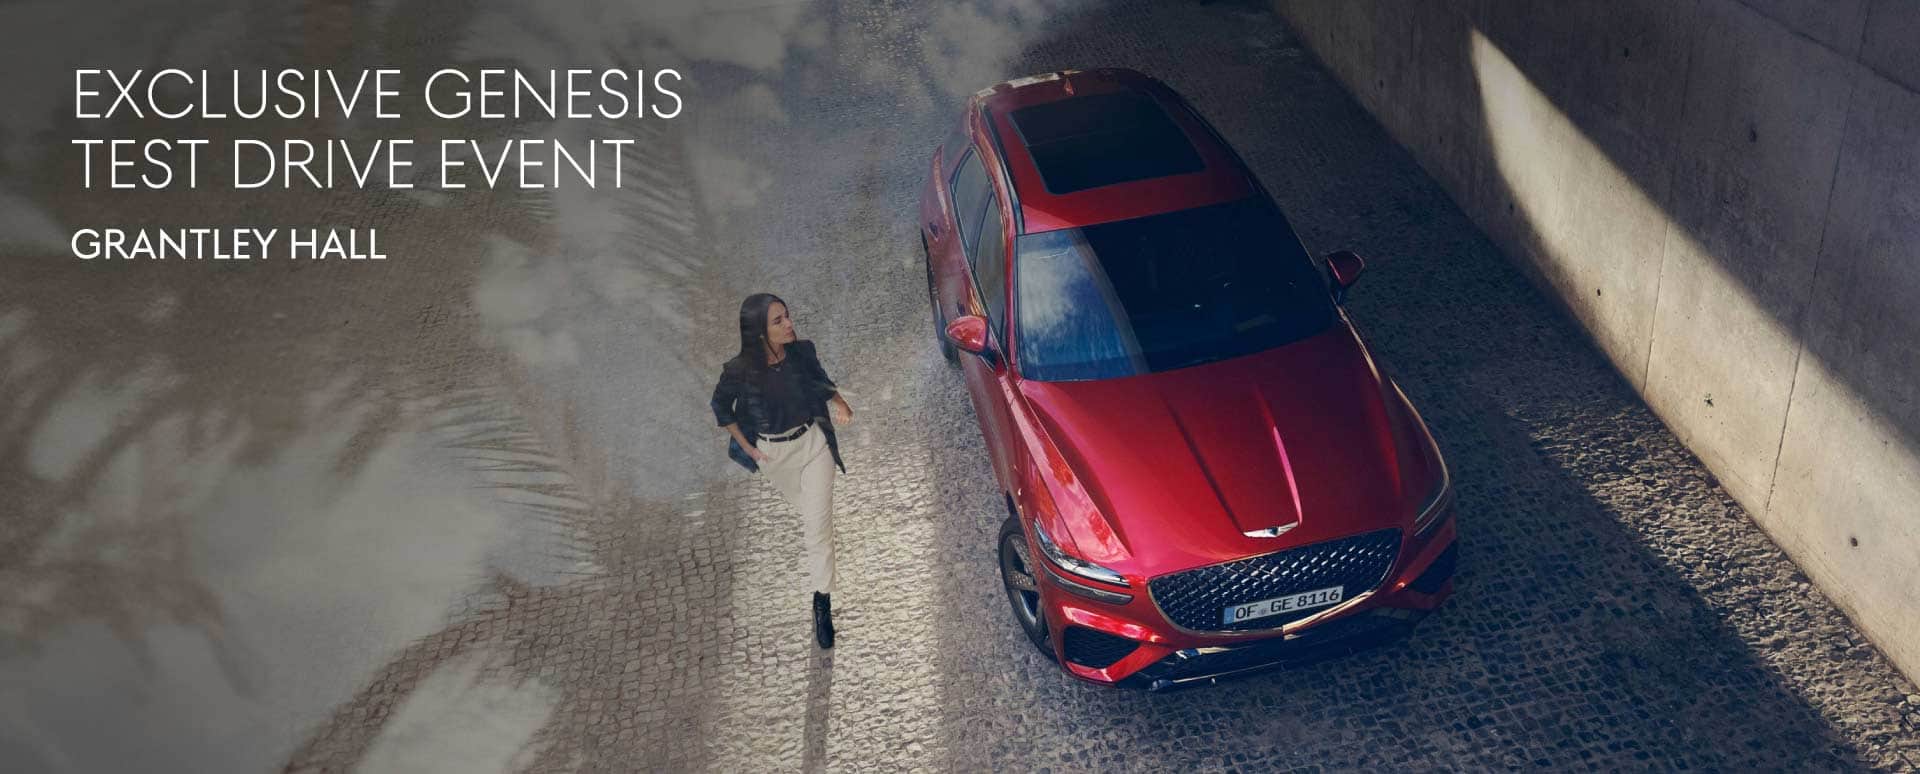 A red Genesis car photographed from above. Parked in a quiet area with a woman walking beside it.